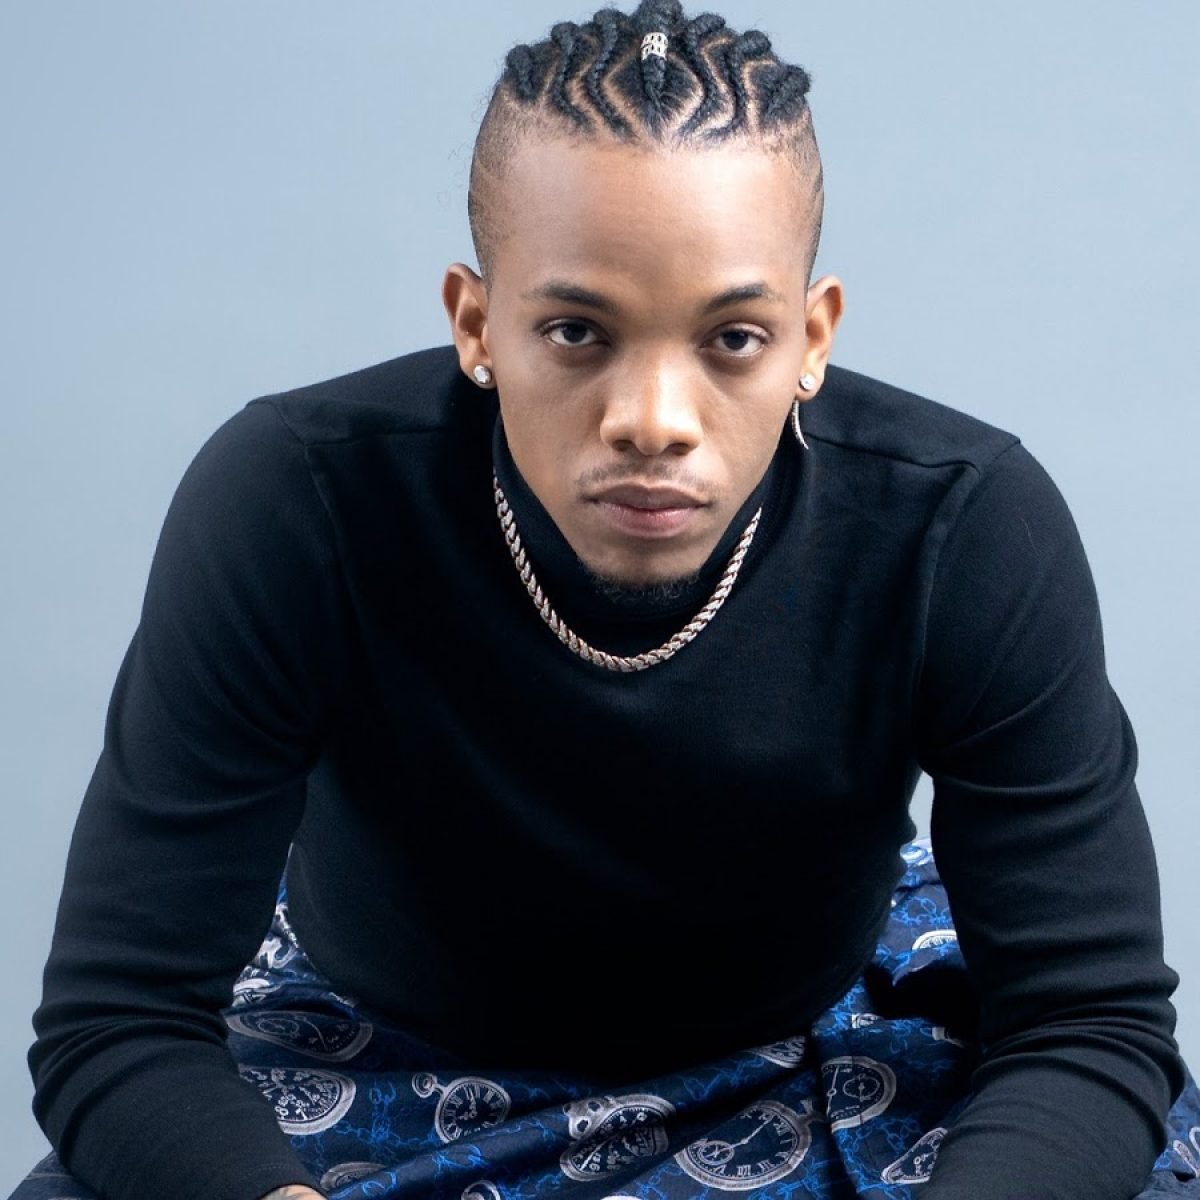 Zambian woman alleges Tekno's song made her pregnant, demands for child support